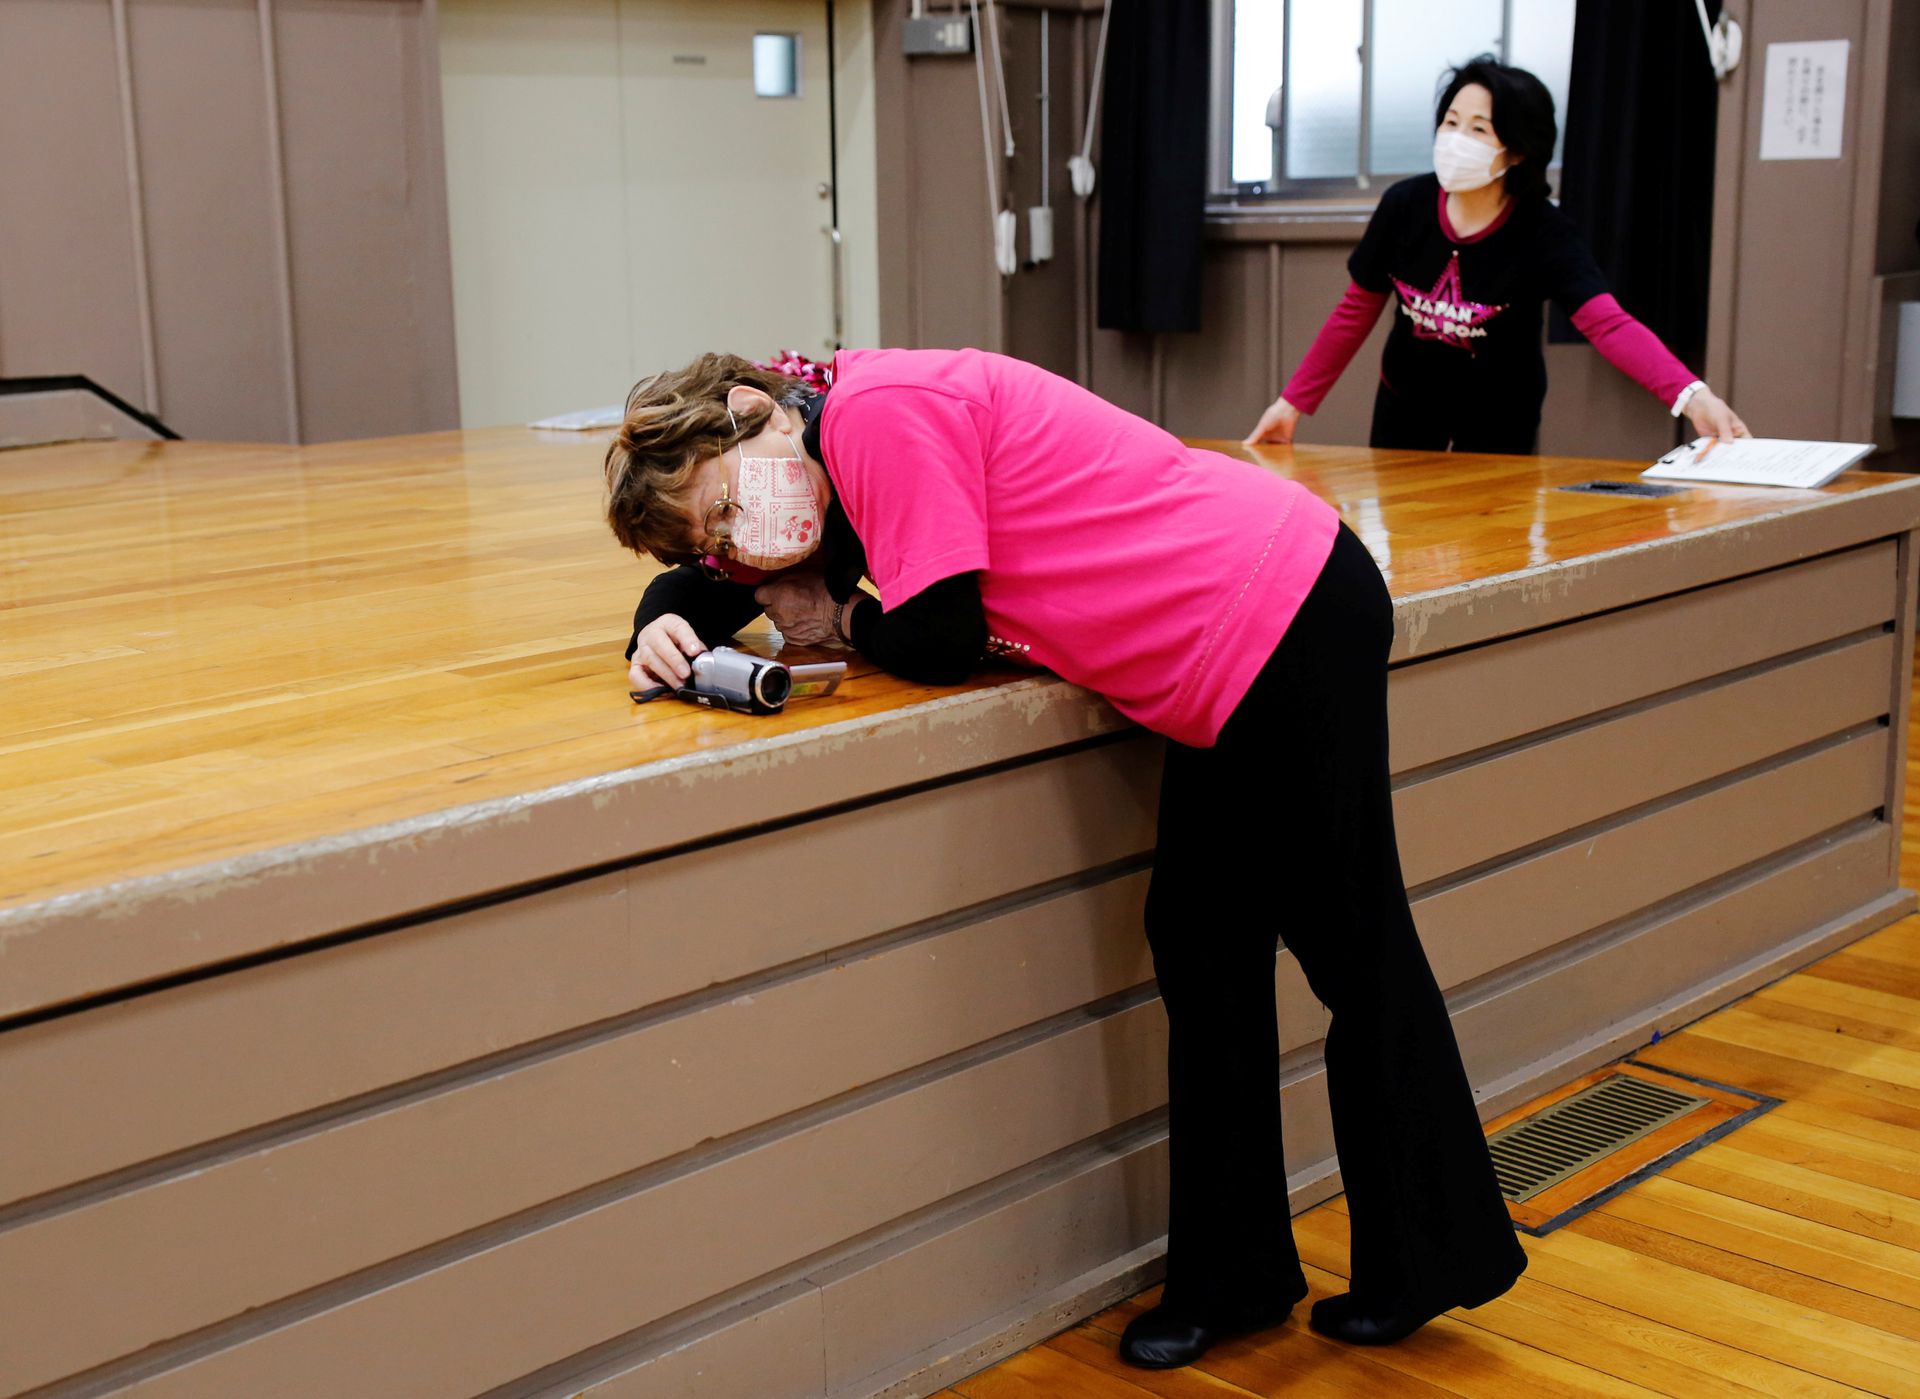 Fumie Takino, 89, founder of a senior cheer squad called Japan Pom Pom, sets up a video camera to film the team's dance routine during a weekly practice session in Tokyo, Japan April 5, 2021. Photo: Reuters